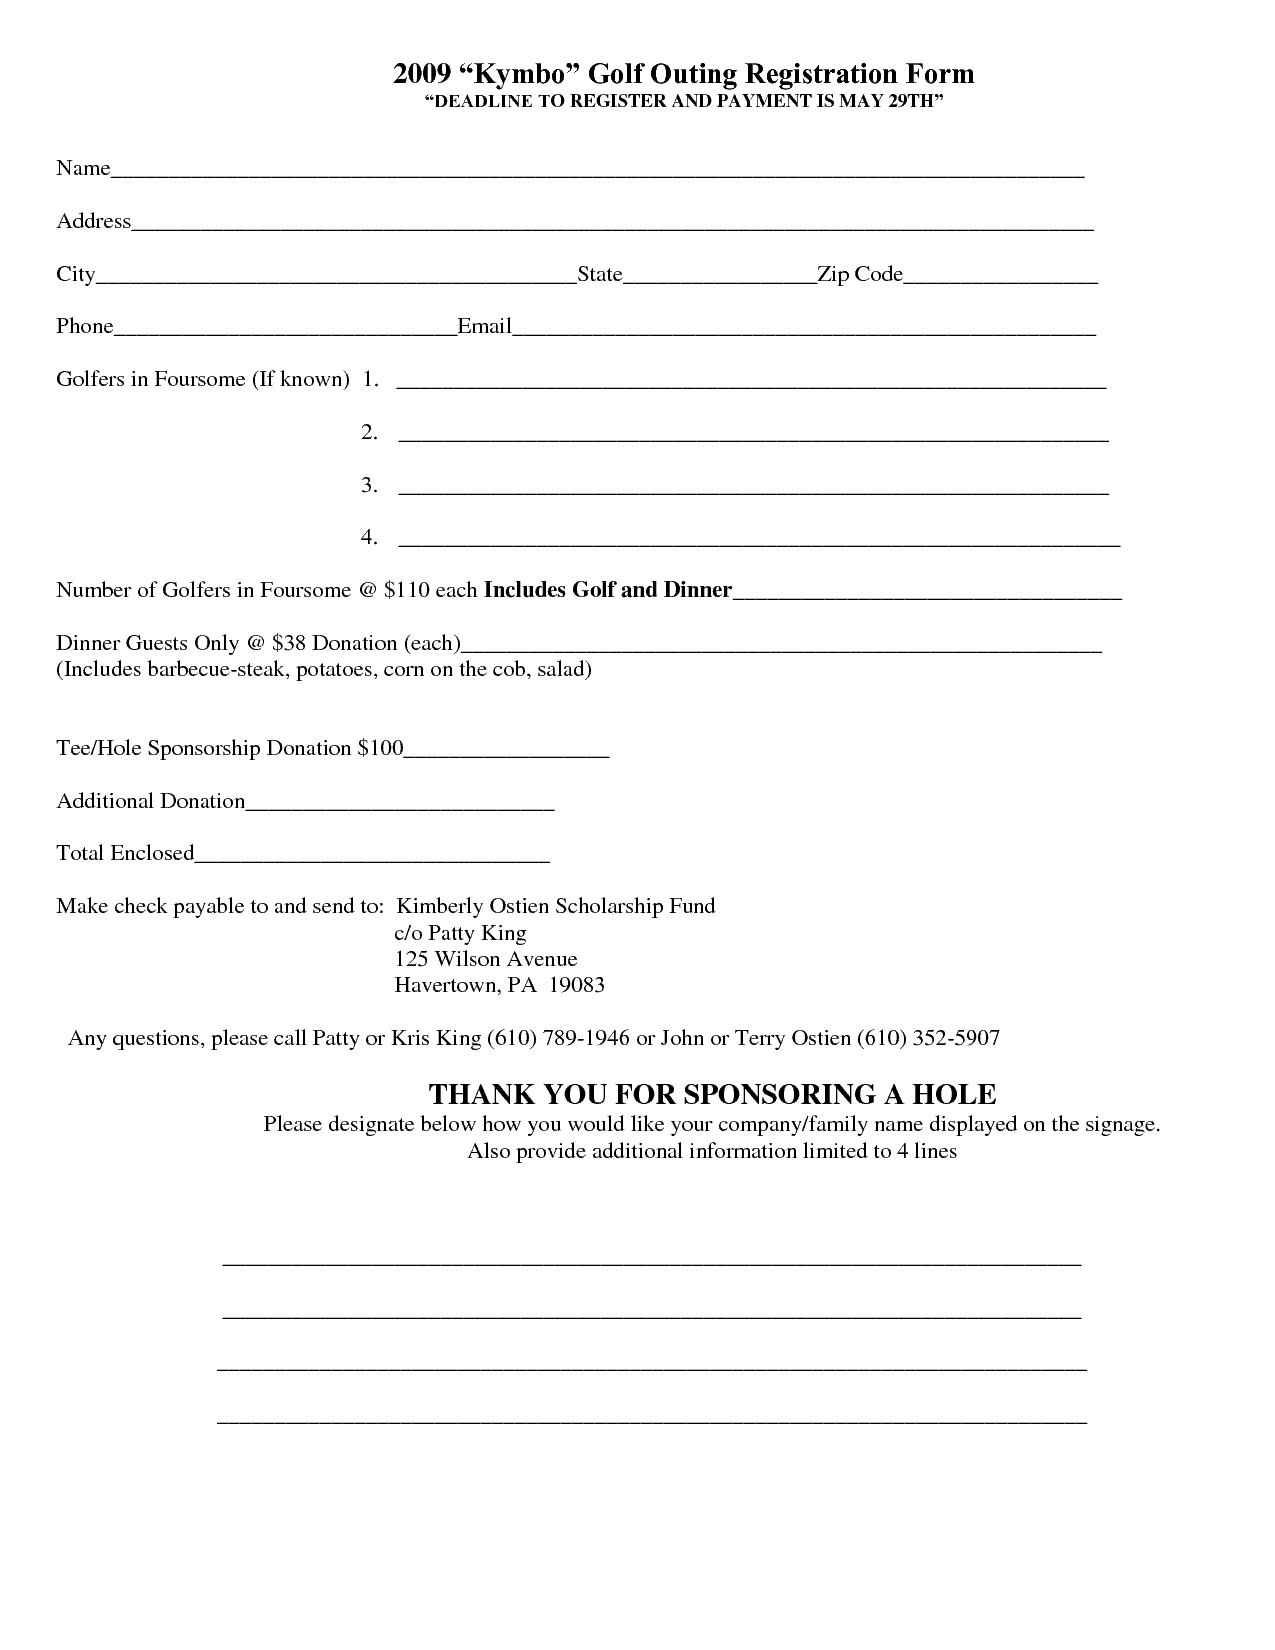 Registration Form In Word – Barati.ald2014 Within Seminar Registration Form Template Word